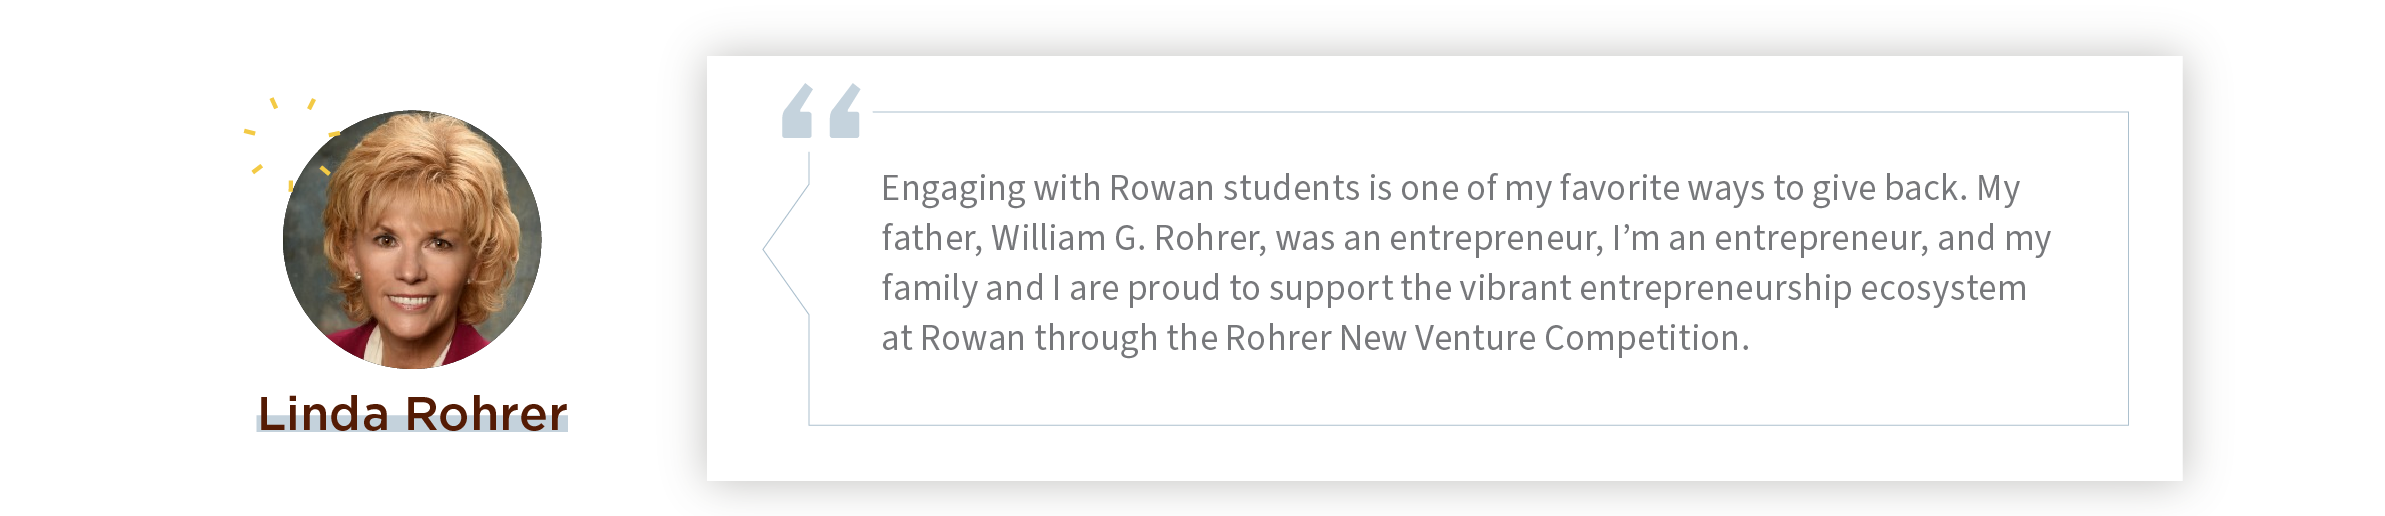 Quote: “Engaging with Rowan students is one of my favorite ways to give back. My father, William G. Rohrer, was an entrepreneur, I’m an entrepreneur, and my family and I are proud to support the vibrant entrepreneurship ecosystem at Rowan through the Rohrer New Venture Competition.”​